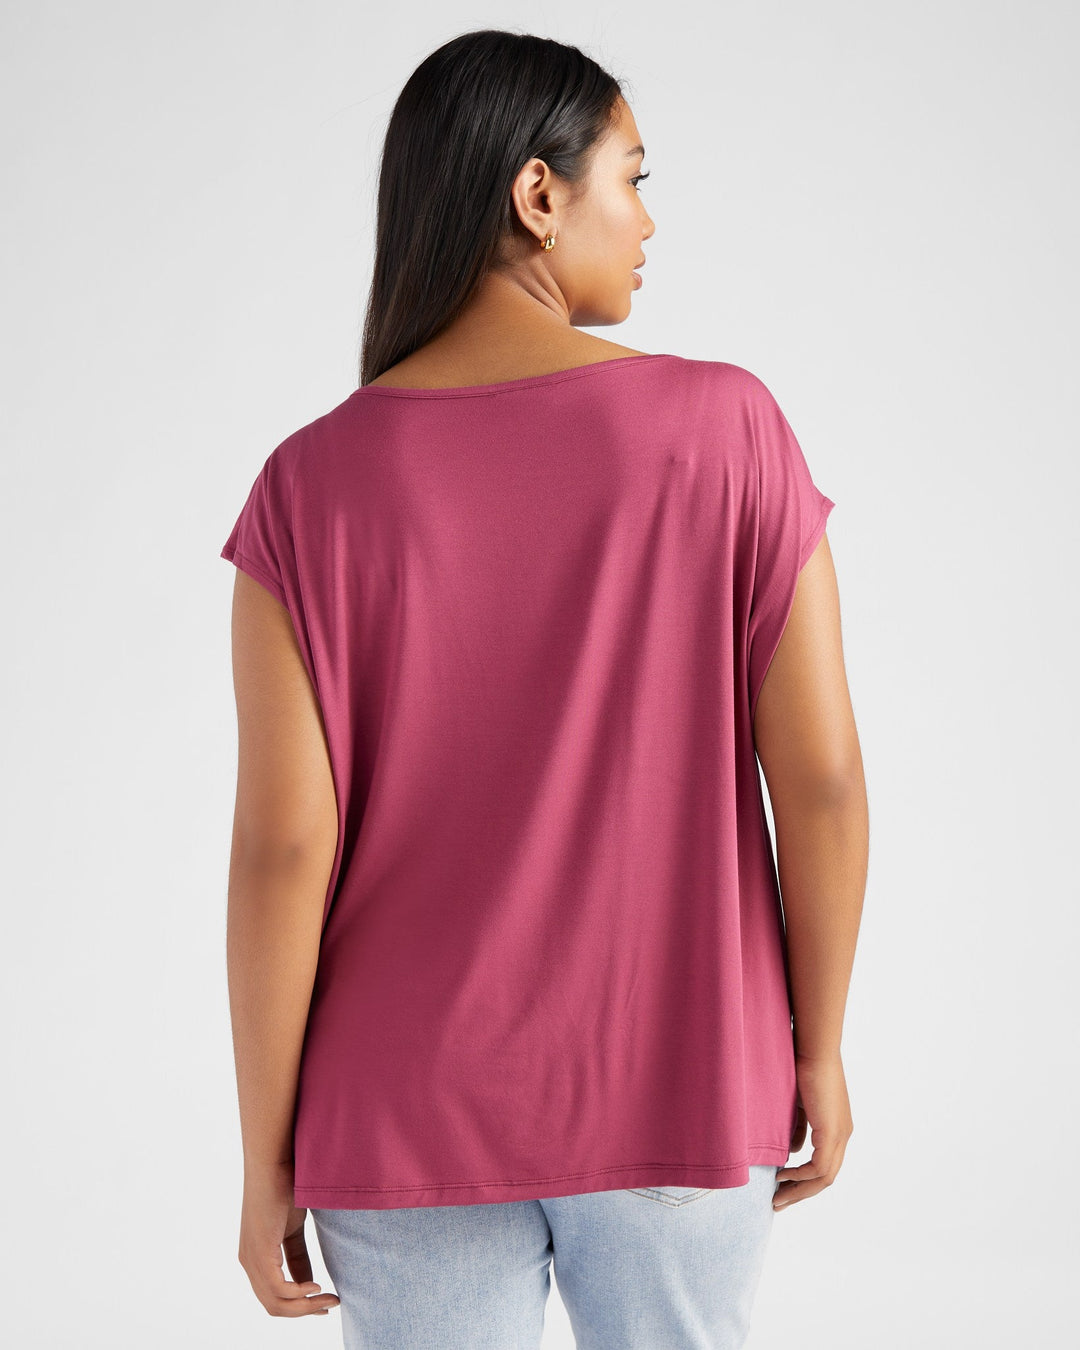 Red Plum $|& 78&SUNNY Brentwood Boat Neck Top - SOF Back